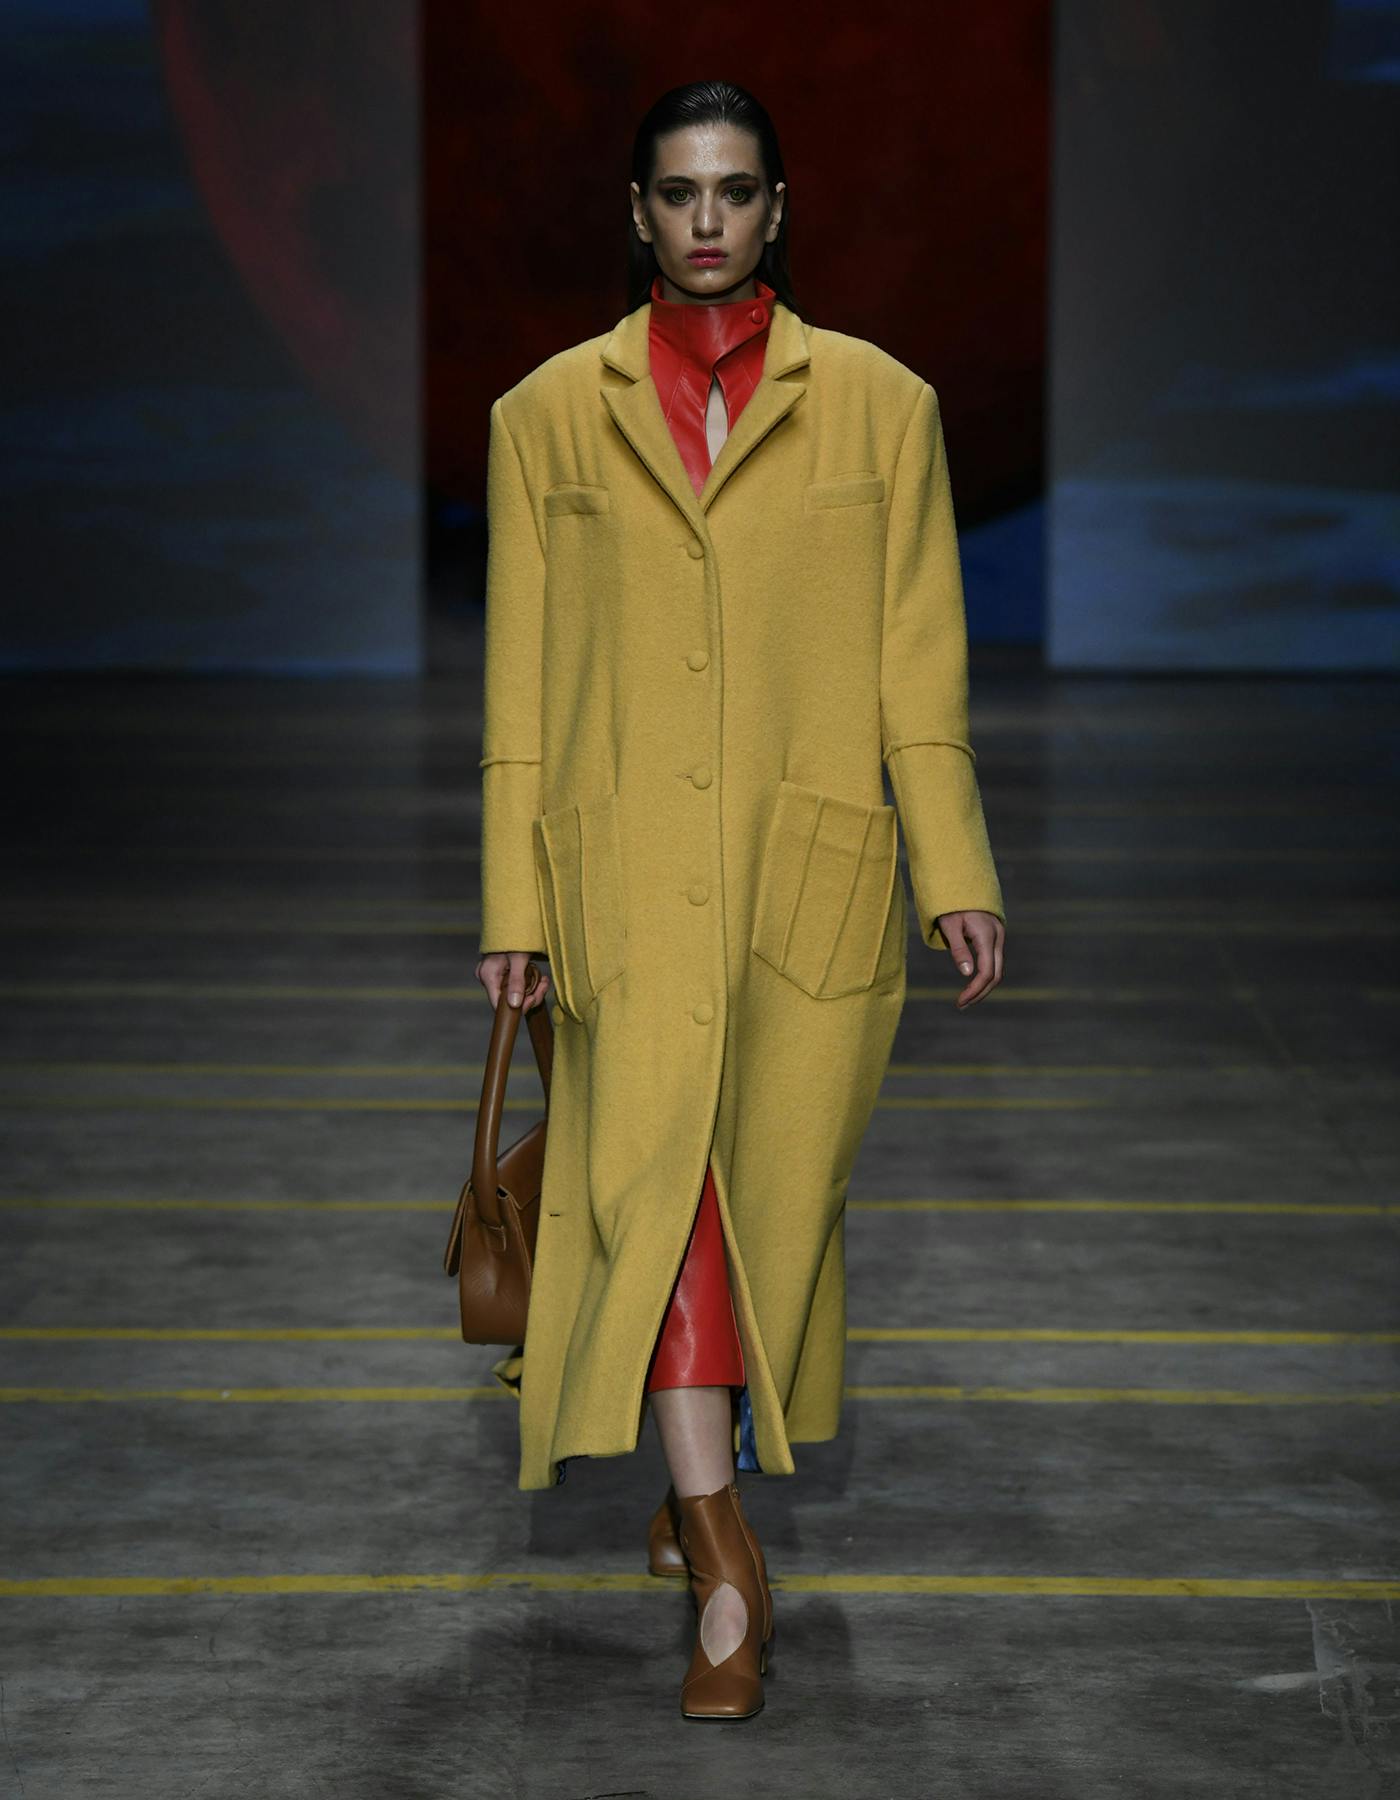 YELLOW WAVY COAT, a product by BLIKVANGER